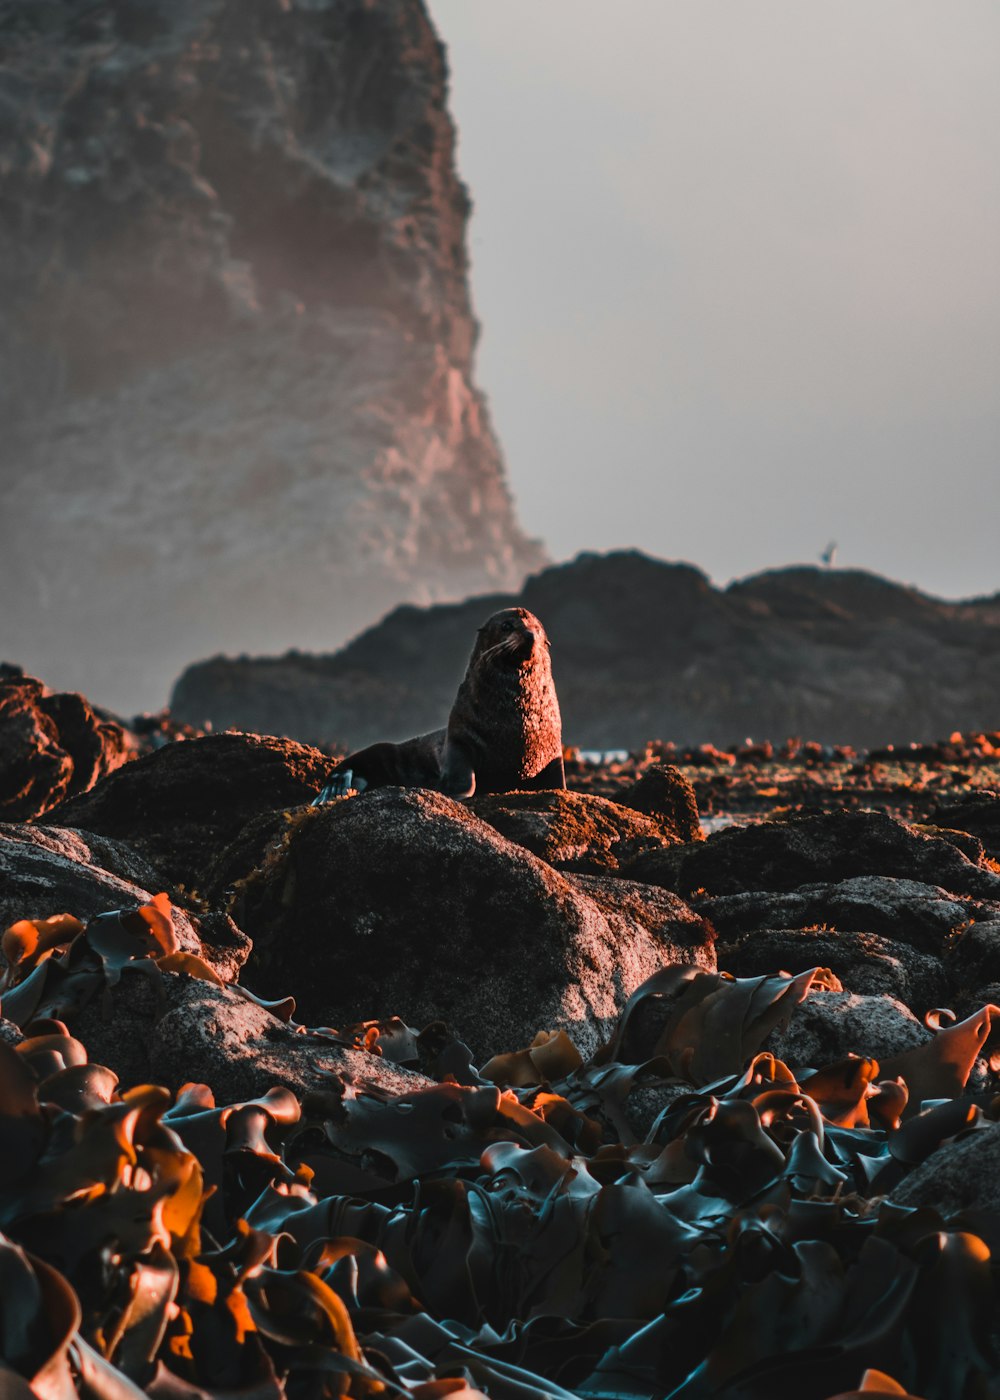 sealion surrounded by rocks during daytime